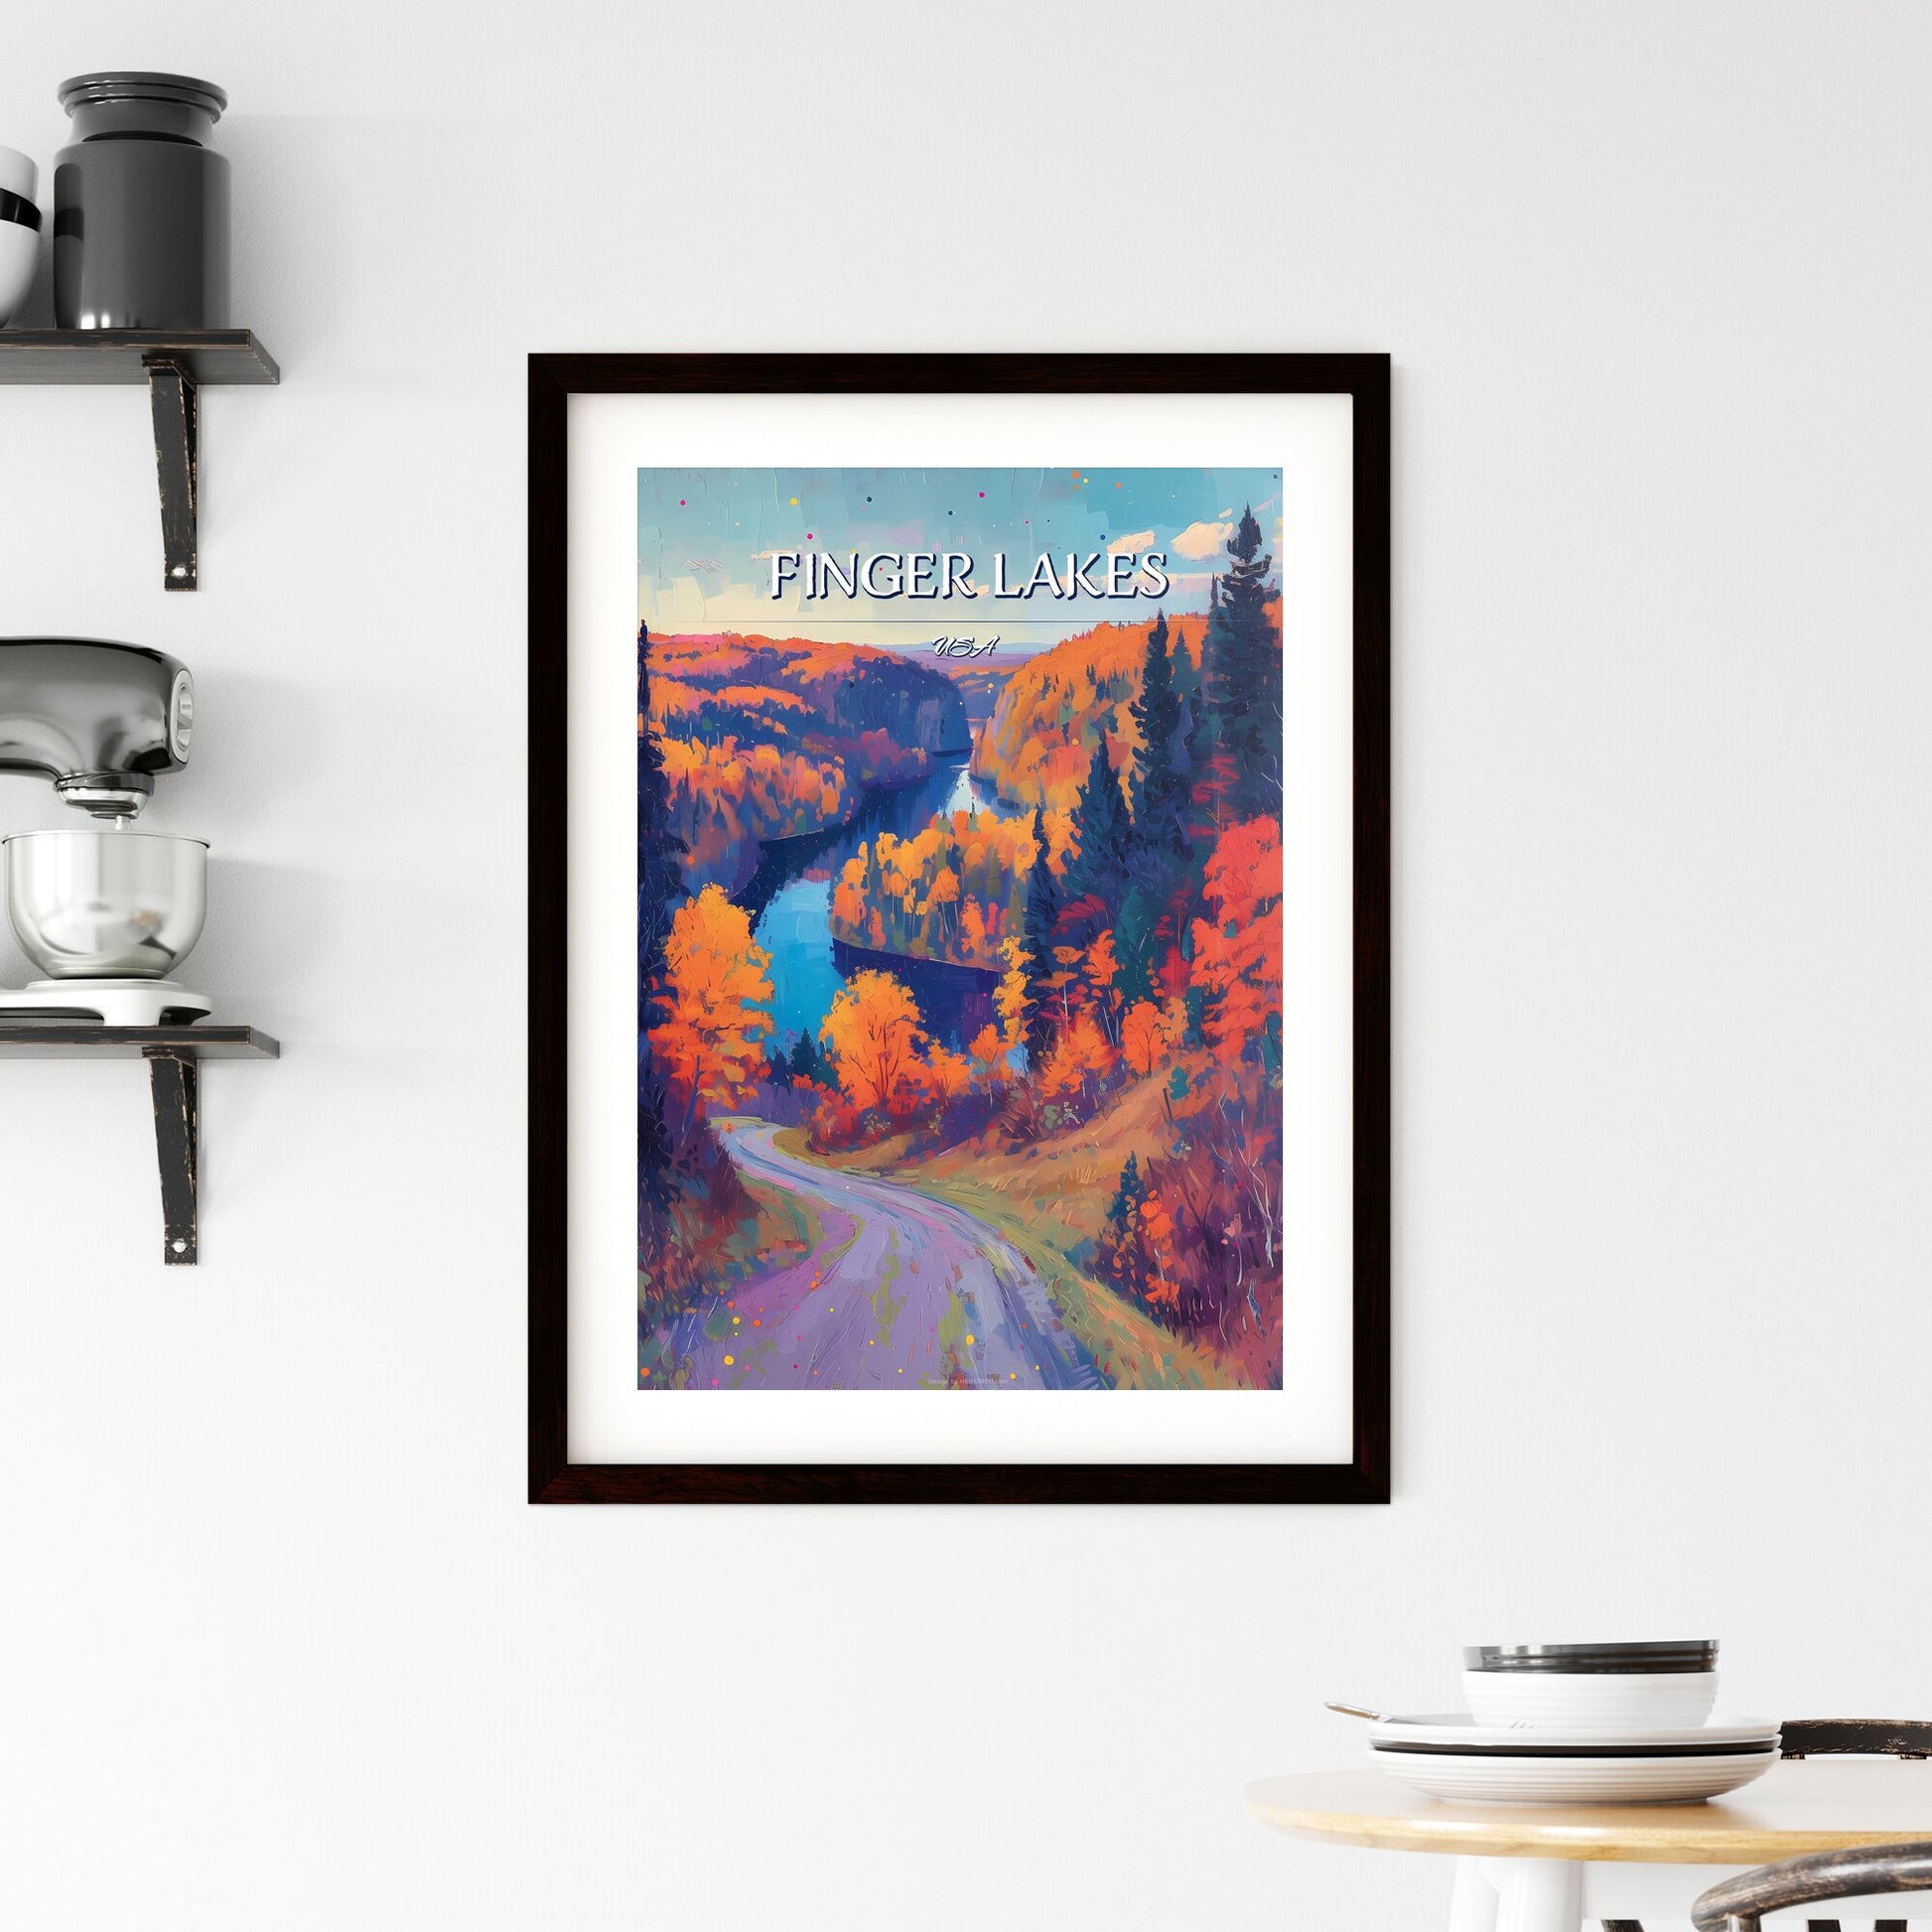 Finger Lakes, USA - Art print of a road through a forest Default Title